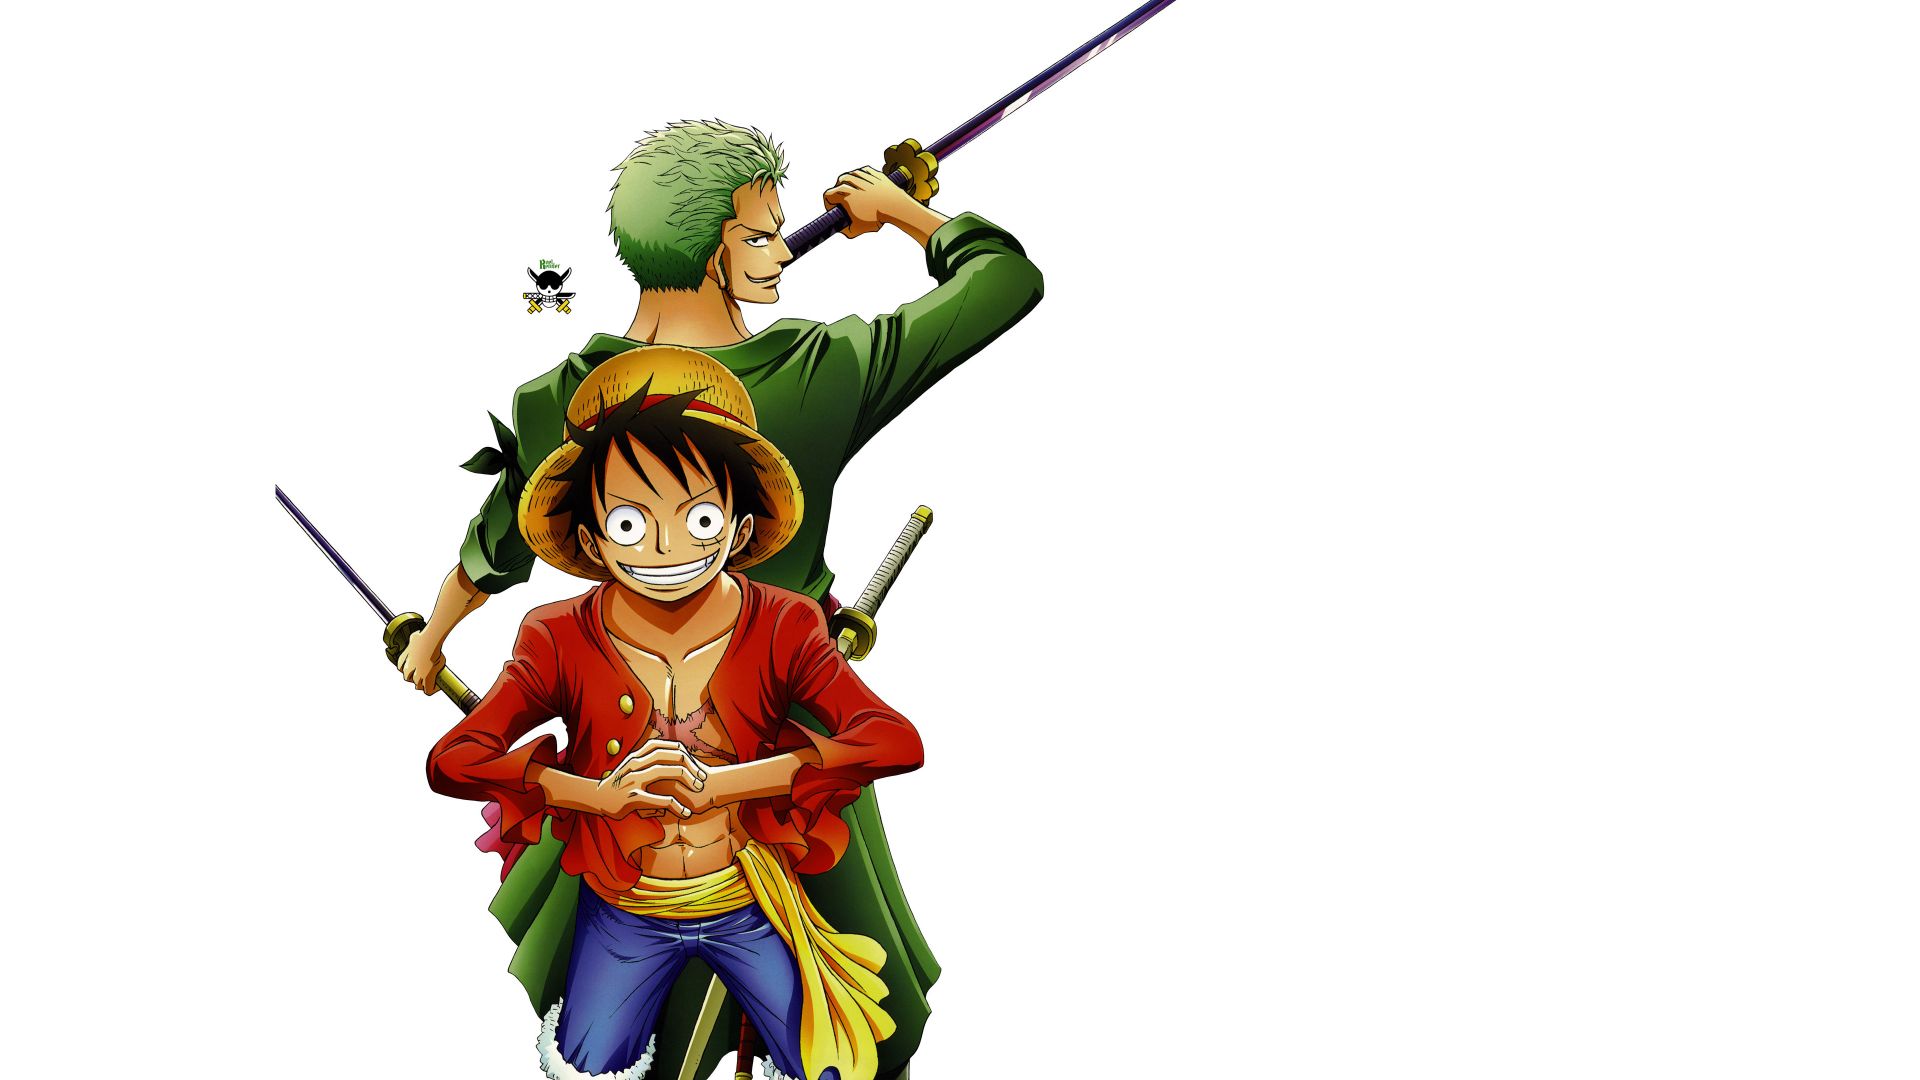 Tons of awesome one piece zoro wallpapers to download for free Wallpapers Hd One Piece Zoro